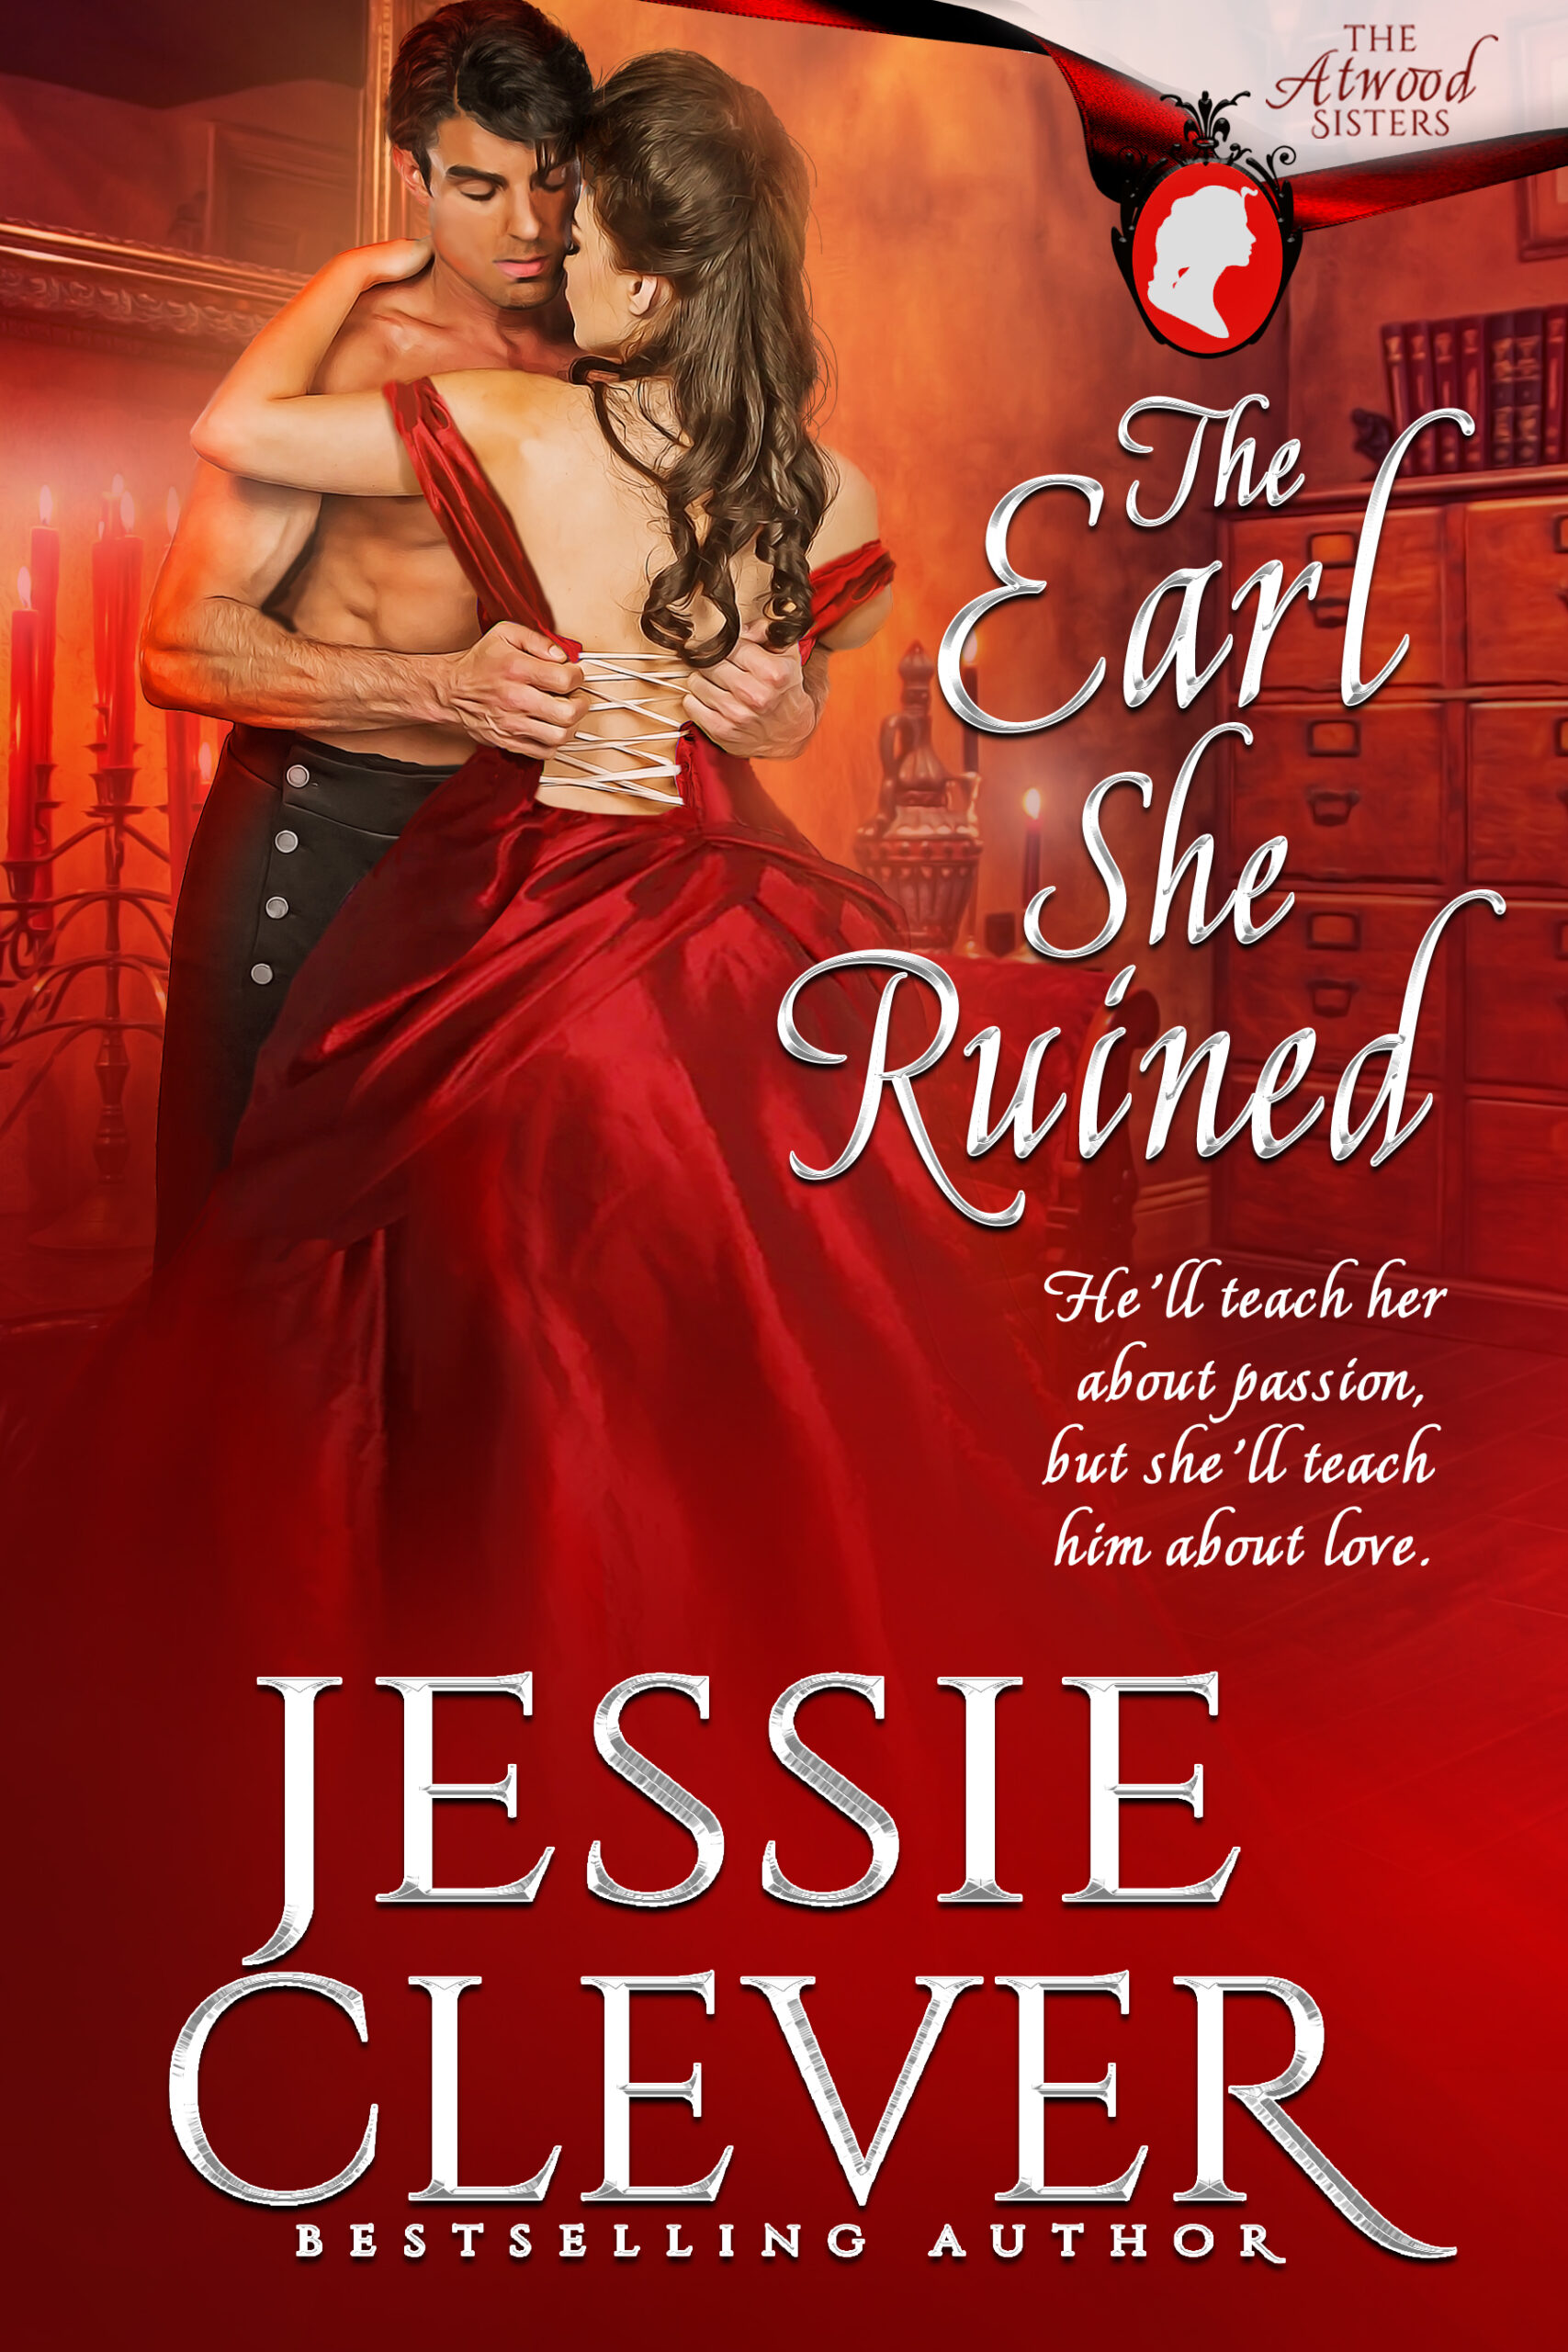 Enjoy an Excerpt From The Earl She Ruined